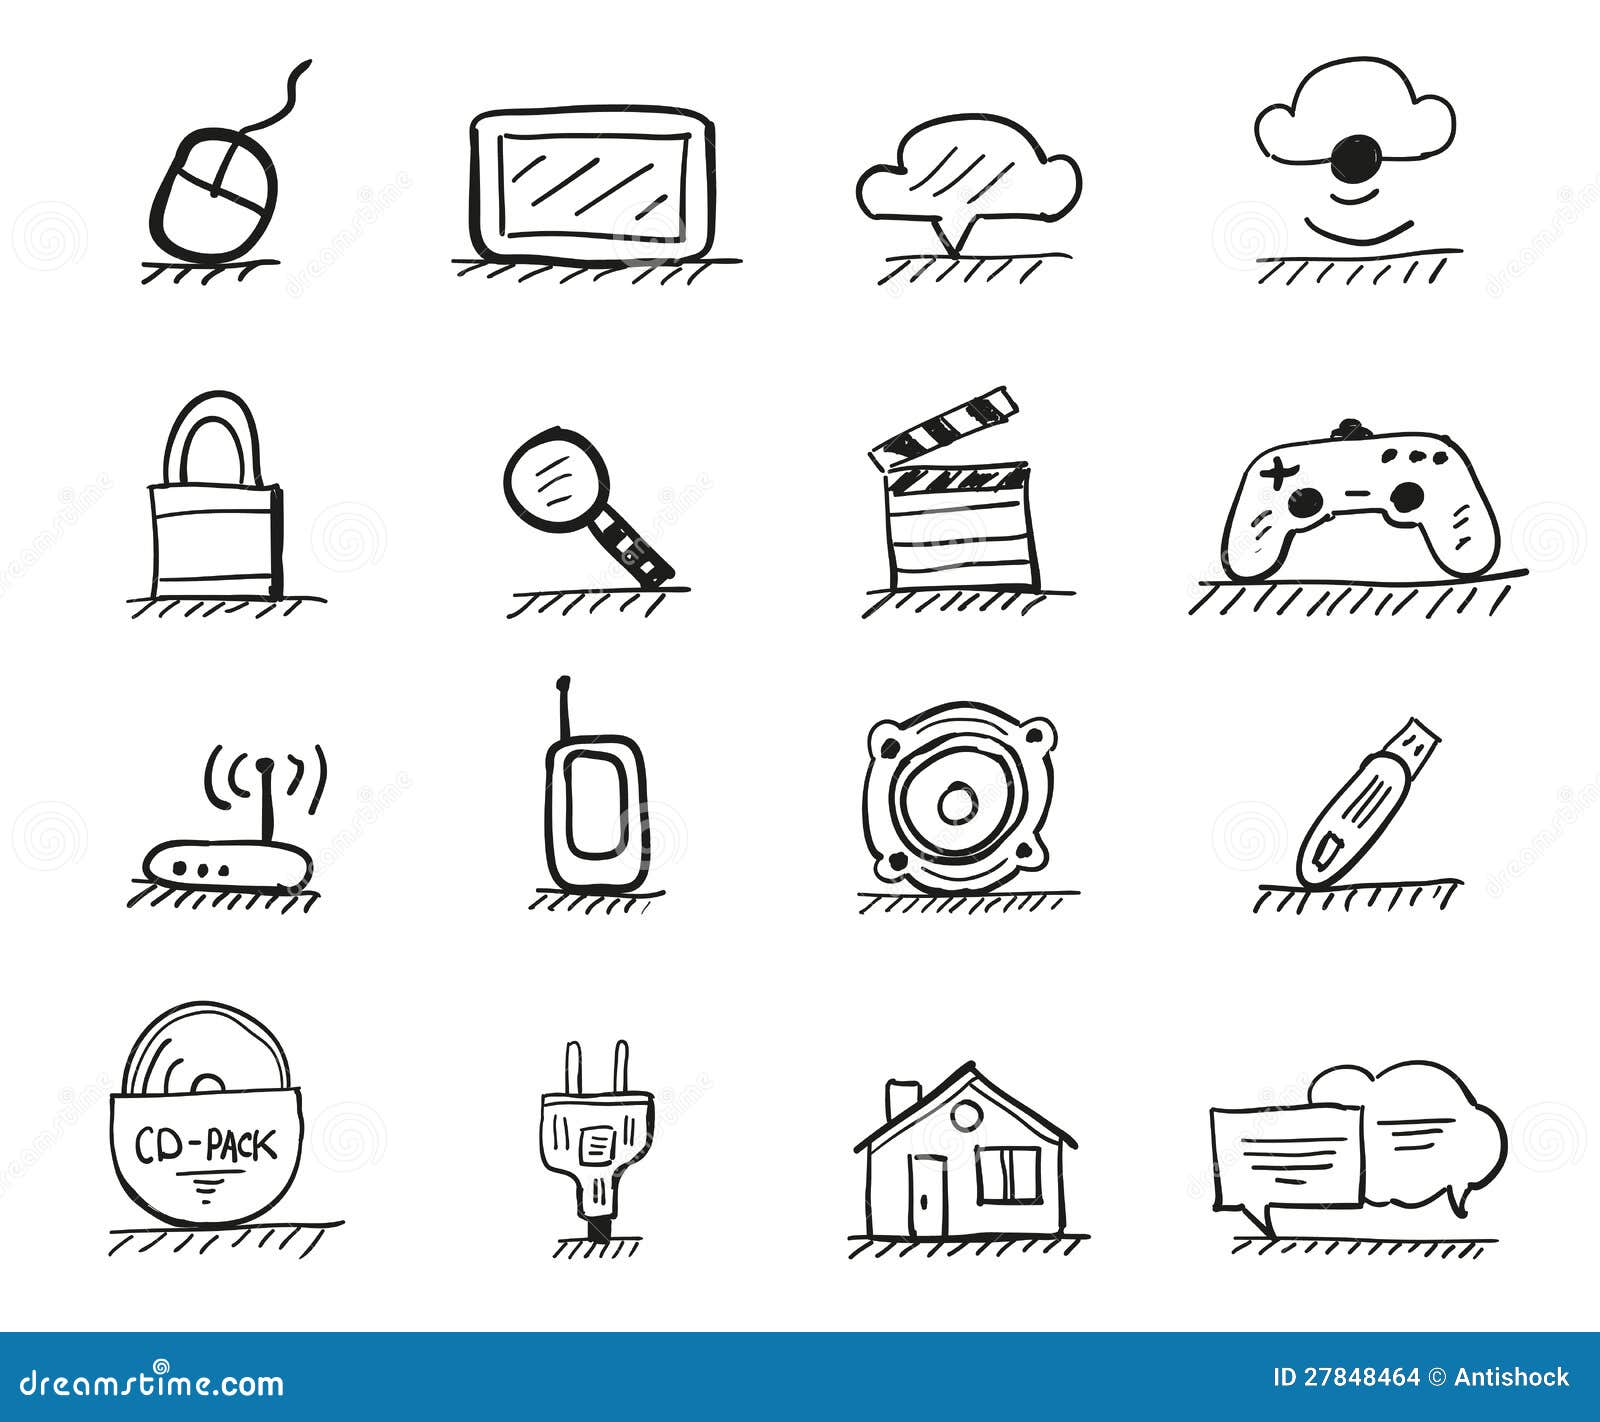 Web Hand Drawn Icons Stock Images - Image: 27848464